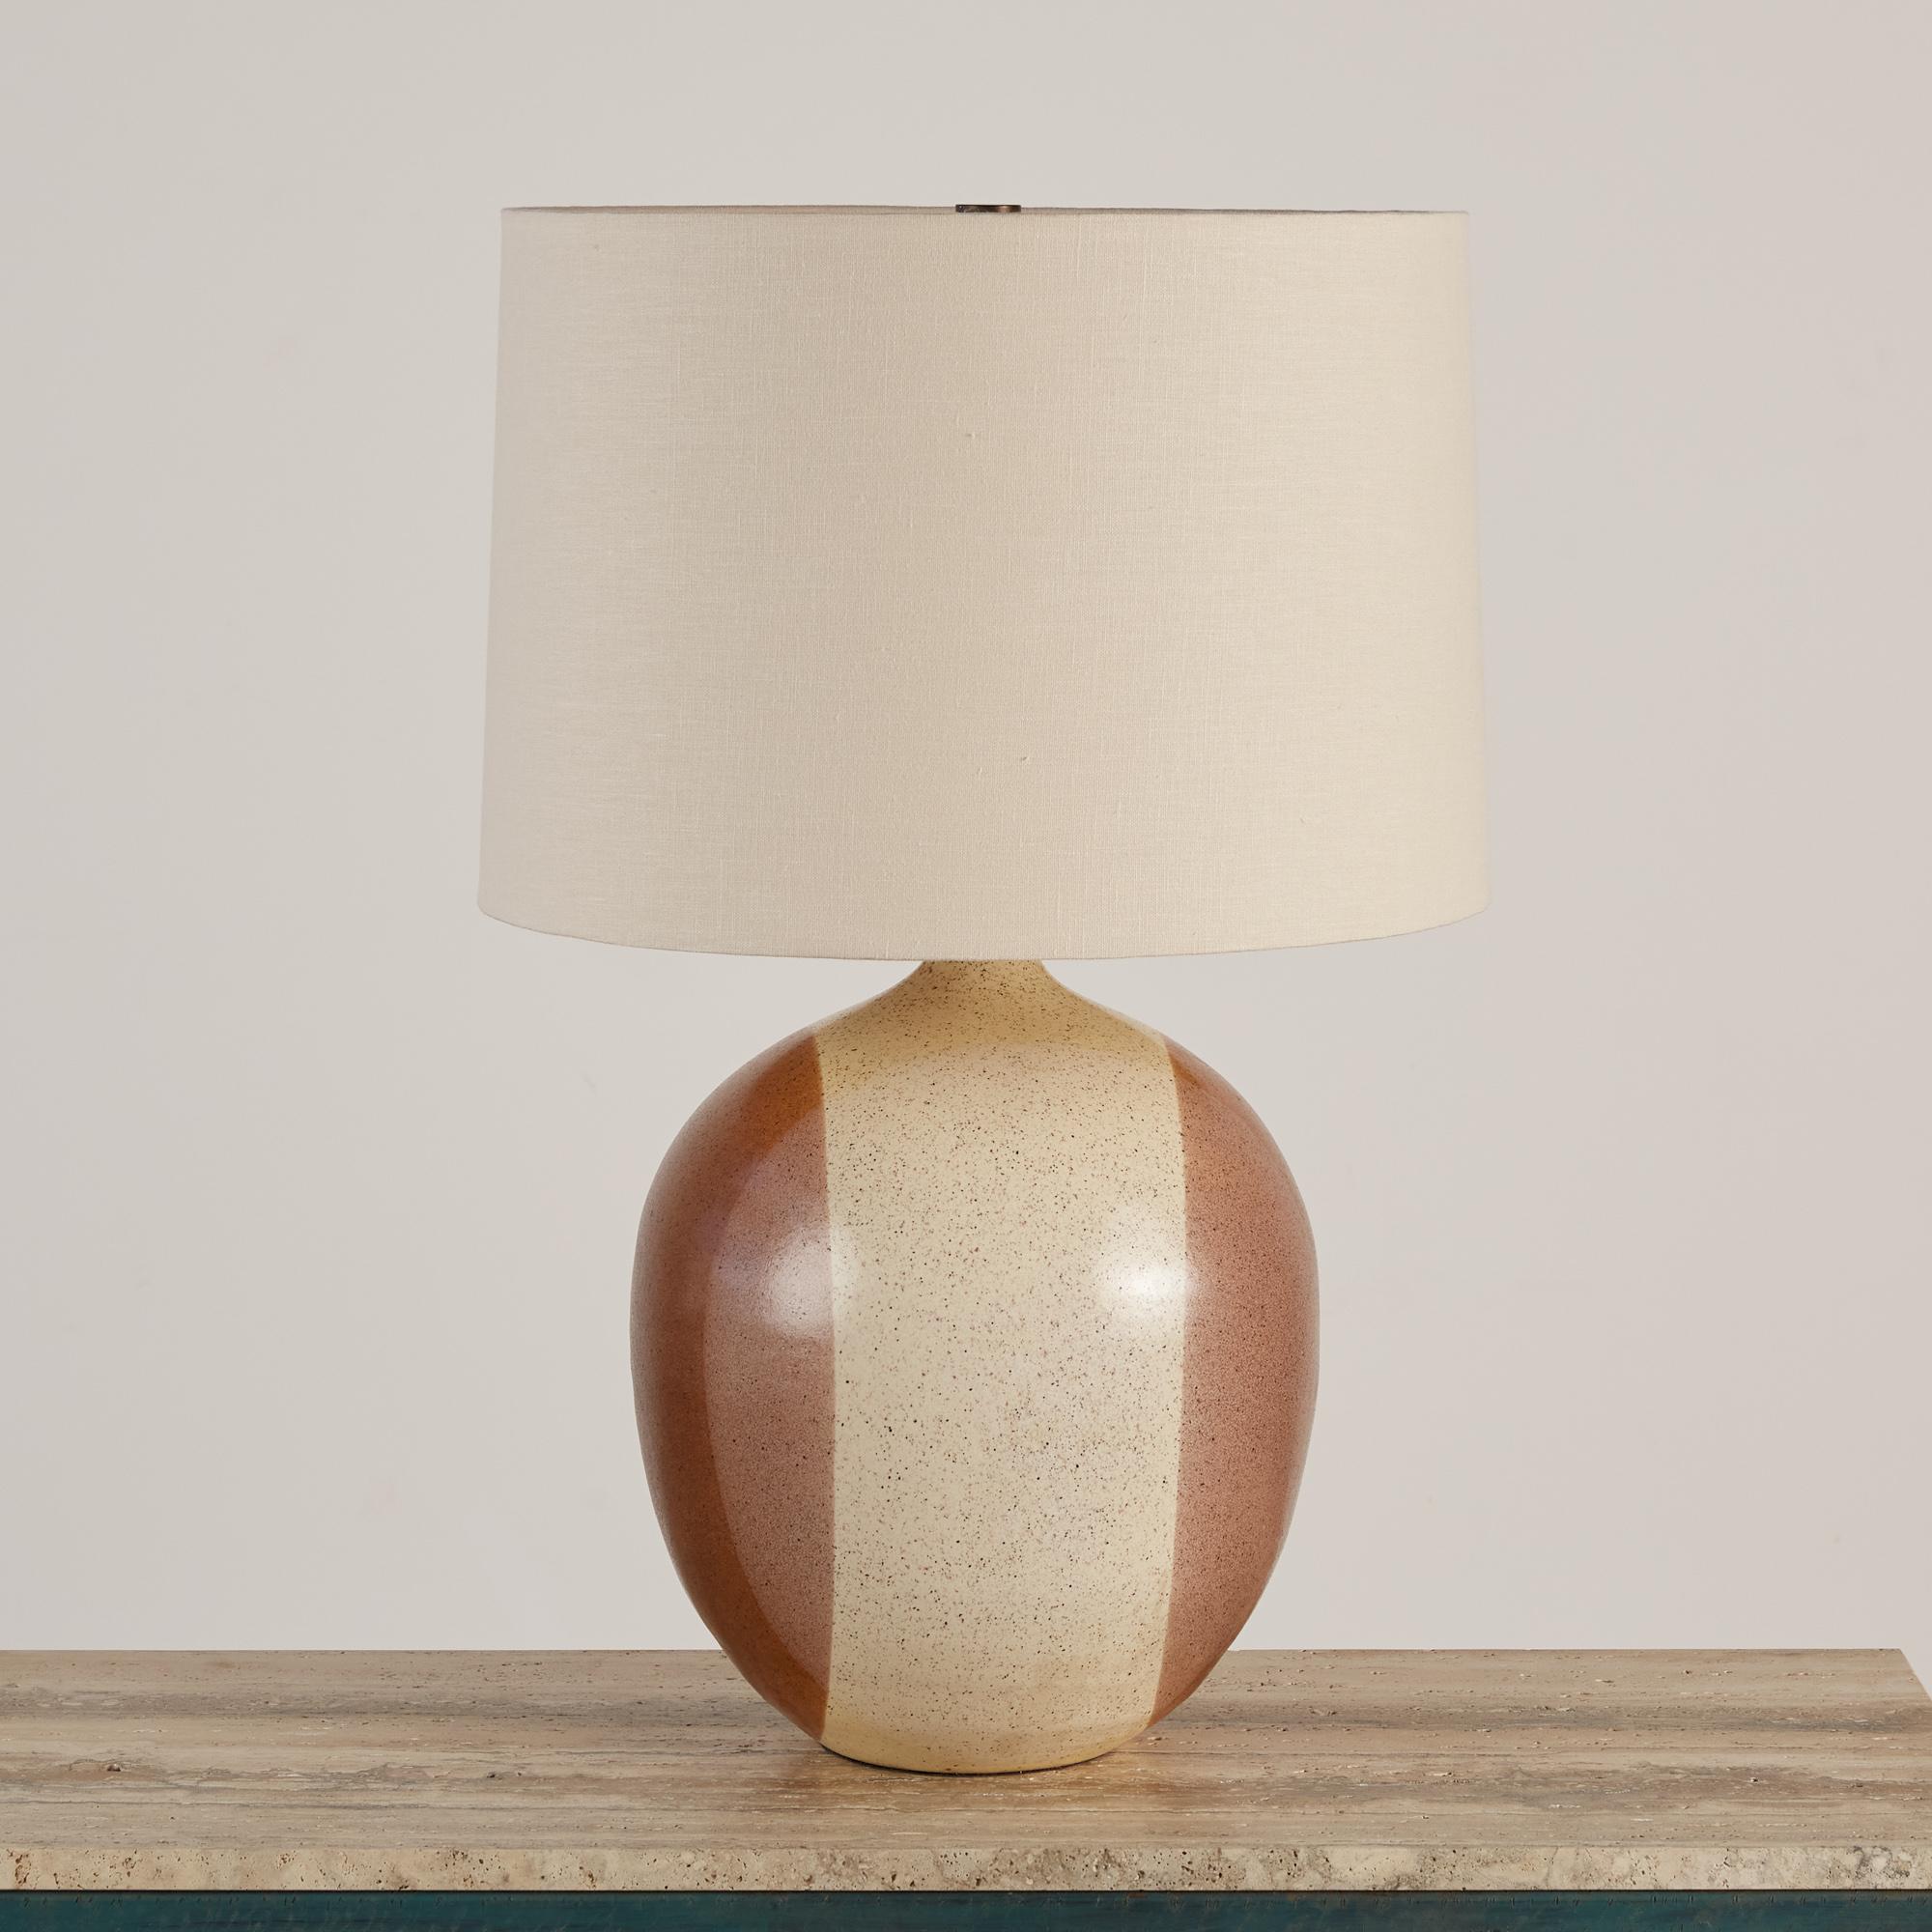 David Cressey style ceramic table lamp with vertical blocked speckled glaze in neutral cream and brown tones. The newly rewired lamp features a new linen shade. The shades and diffuser are secured by a patinated bronze finial.

Dimensions: 18”